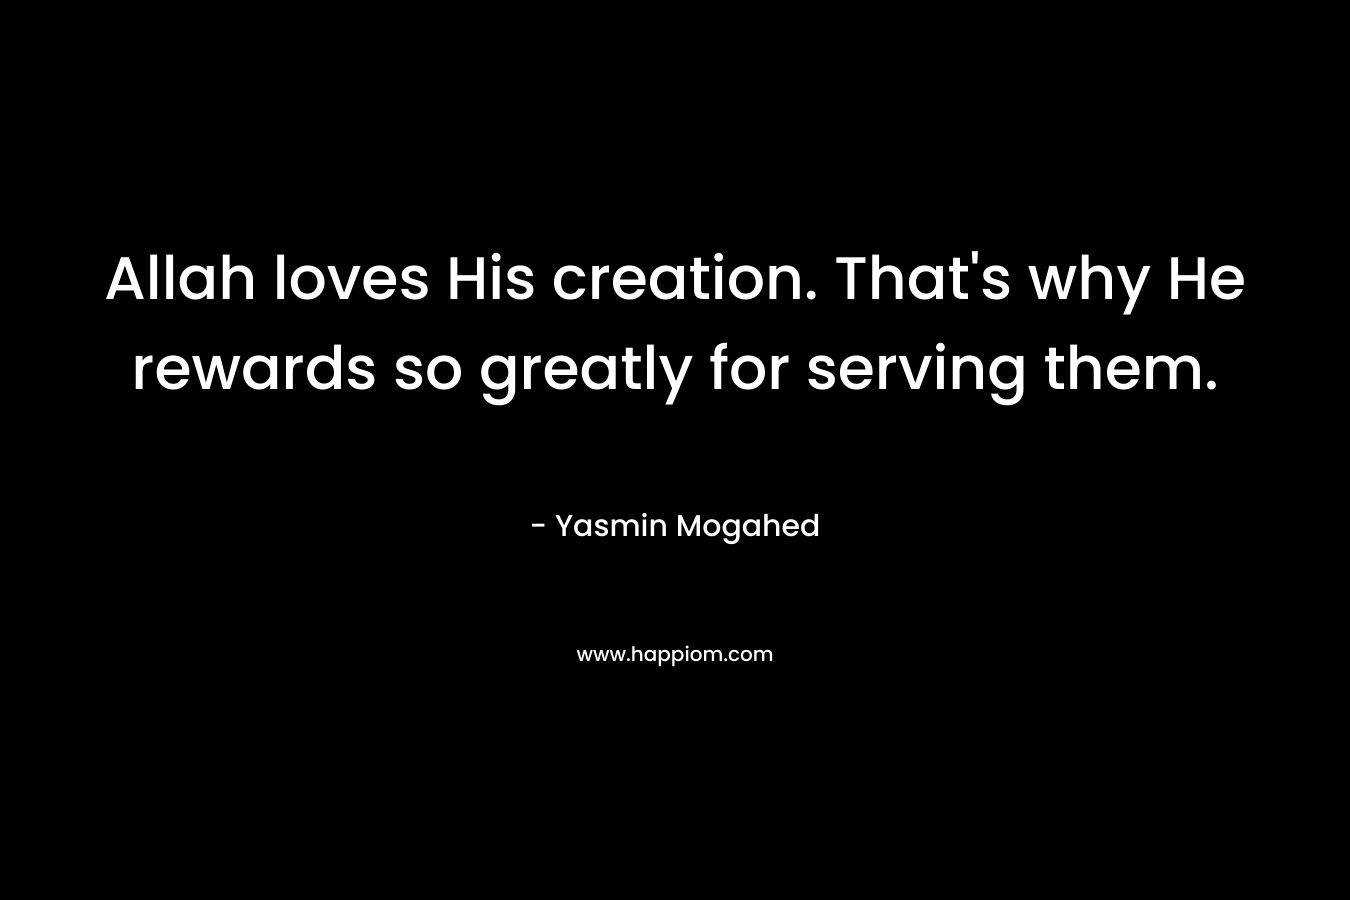 Allah loves His creation. That’s why He rewards so greatly for serving them. – Yasmin Mogahed